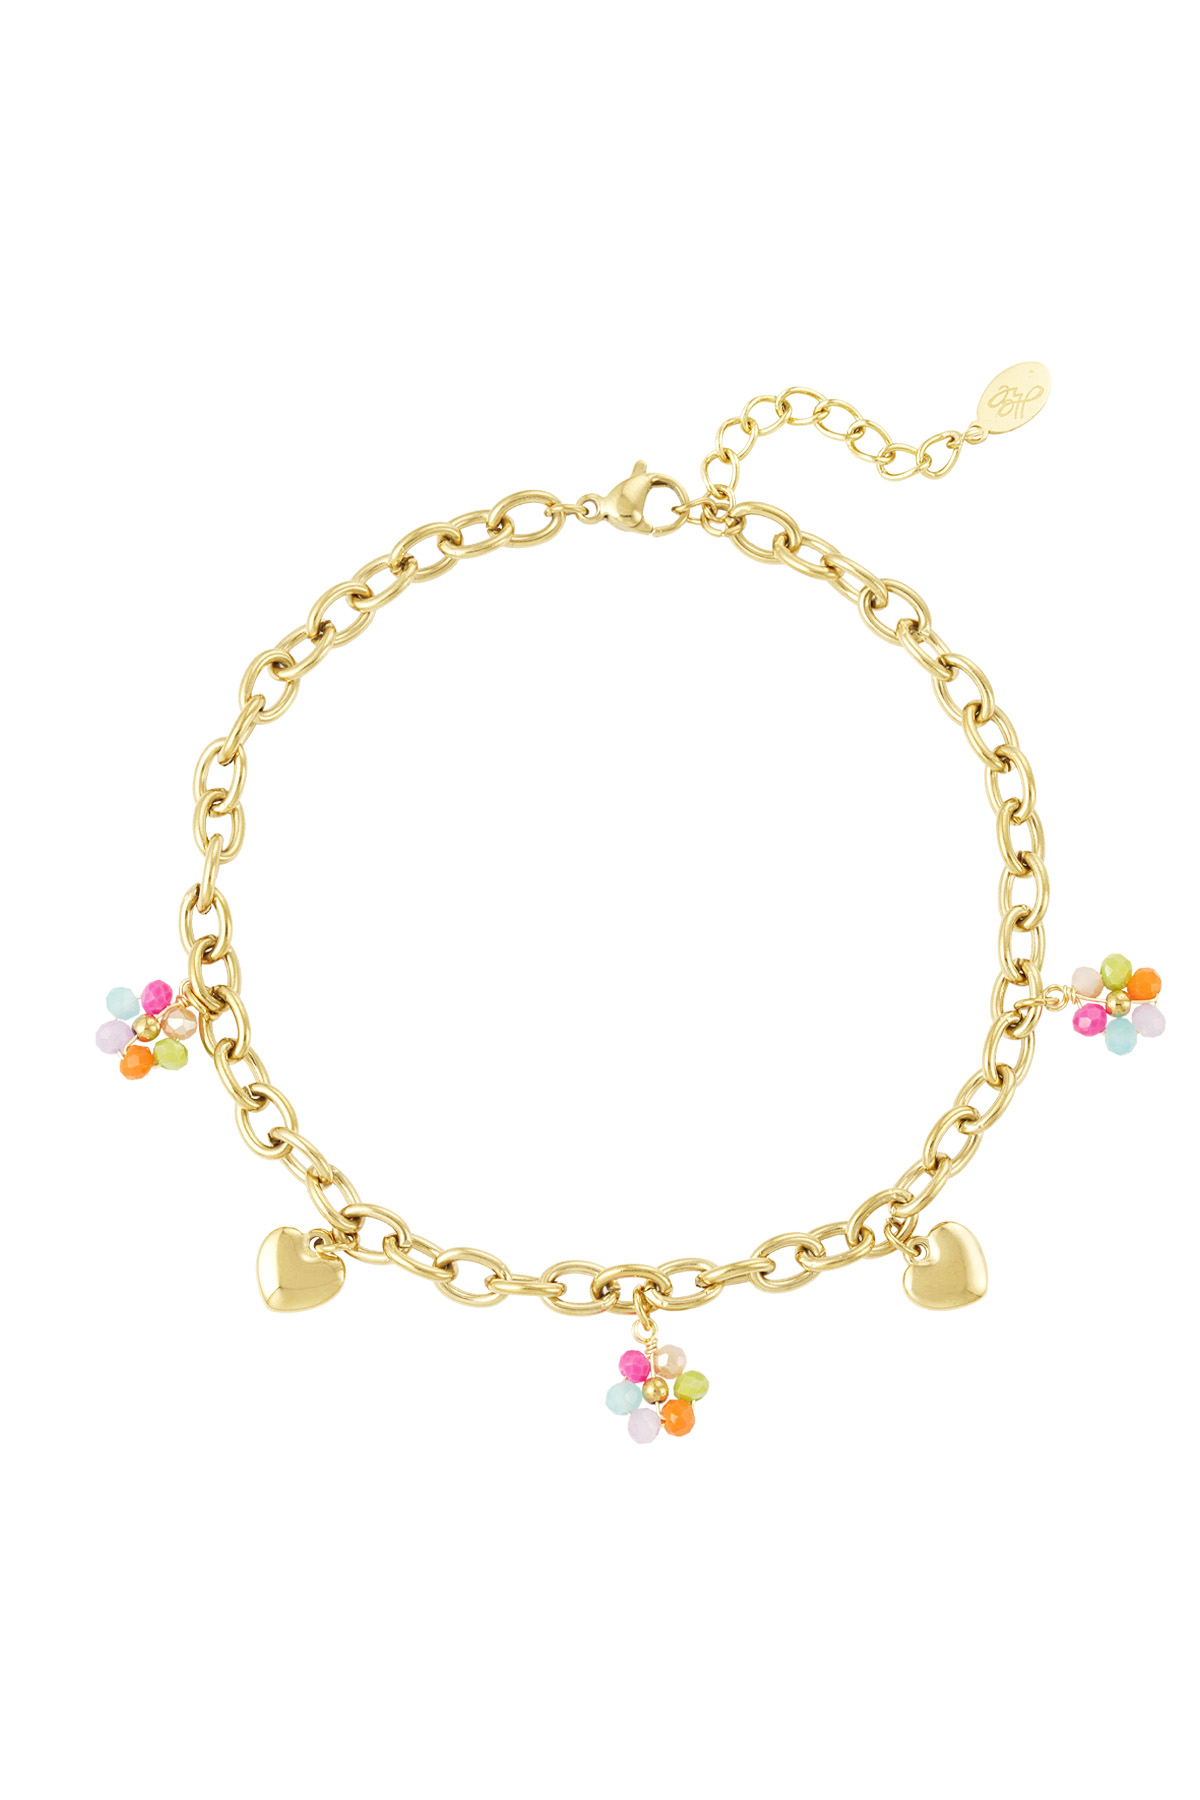 Bracelet with hearts and flowers - gold